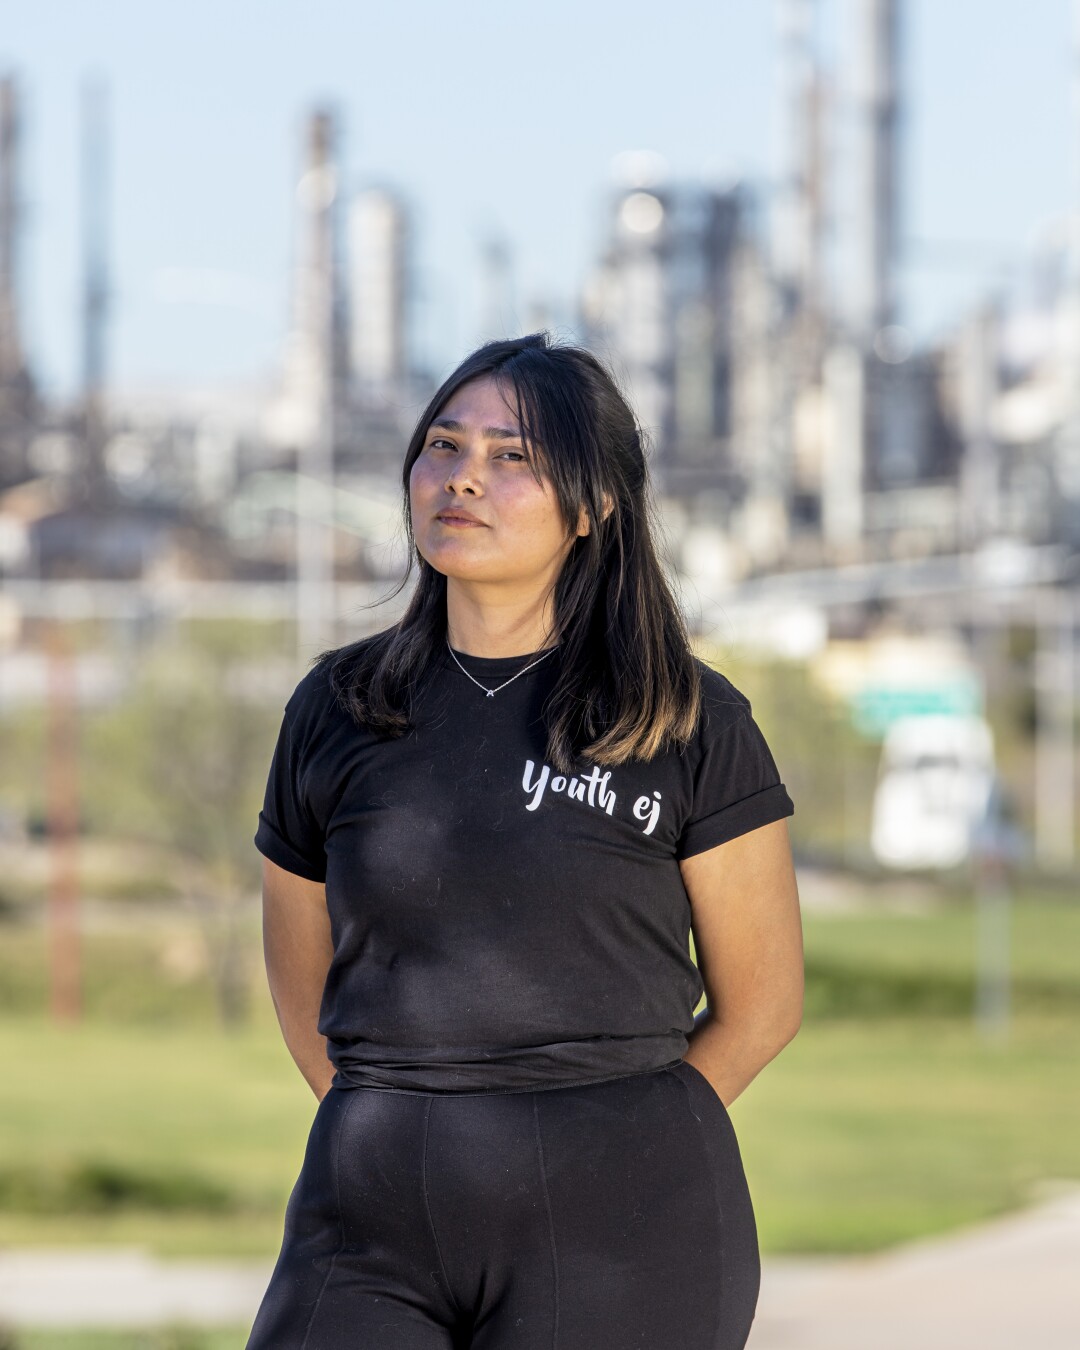 Ashley Hernandez, 28, Communities For a Better Environment (CBE) community organizer and resident, poses for a portrait